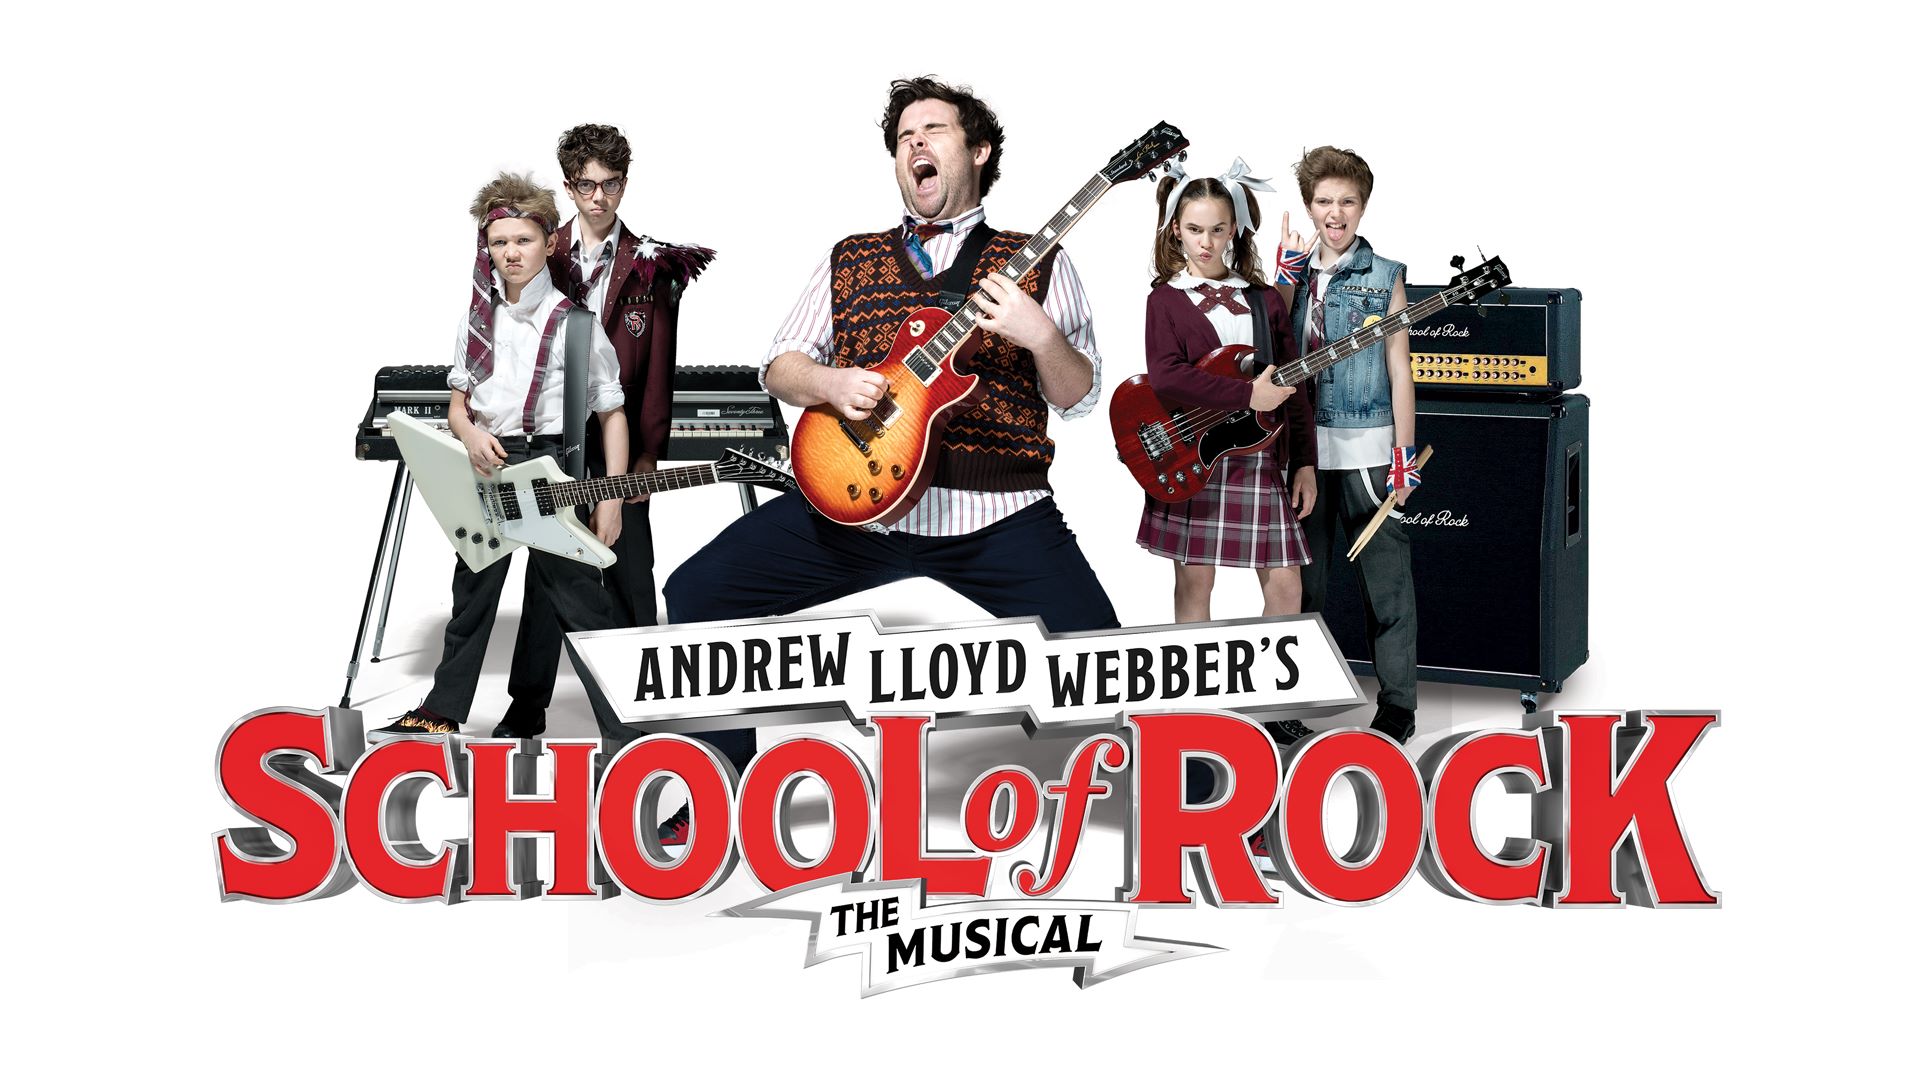 ‘College of Rock’ the Musical Hits Shanghai!